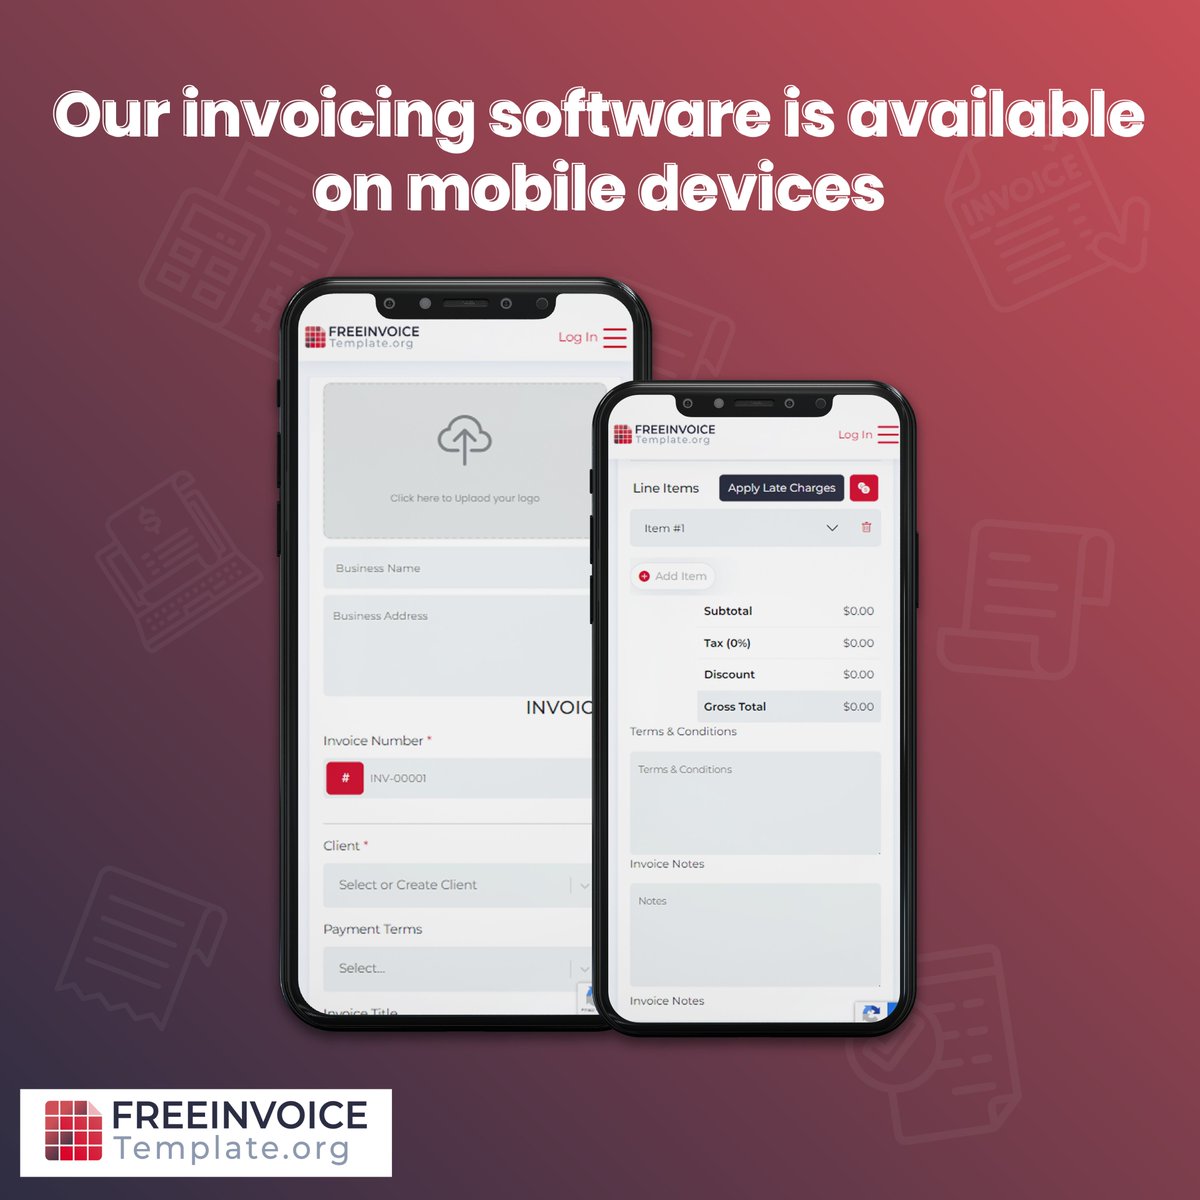 Seamless invoicing, wherever you are!

#Wednesday #InvoiceAutomation #EasyInvoice #SmallBizTools #FreeInvoiceTemplate